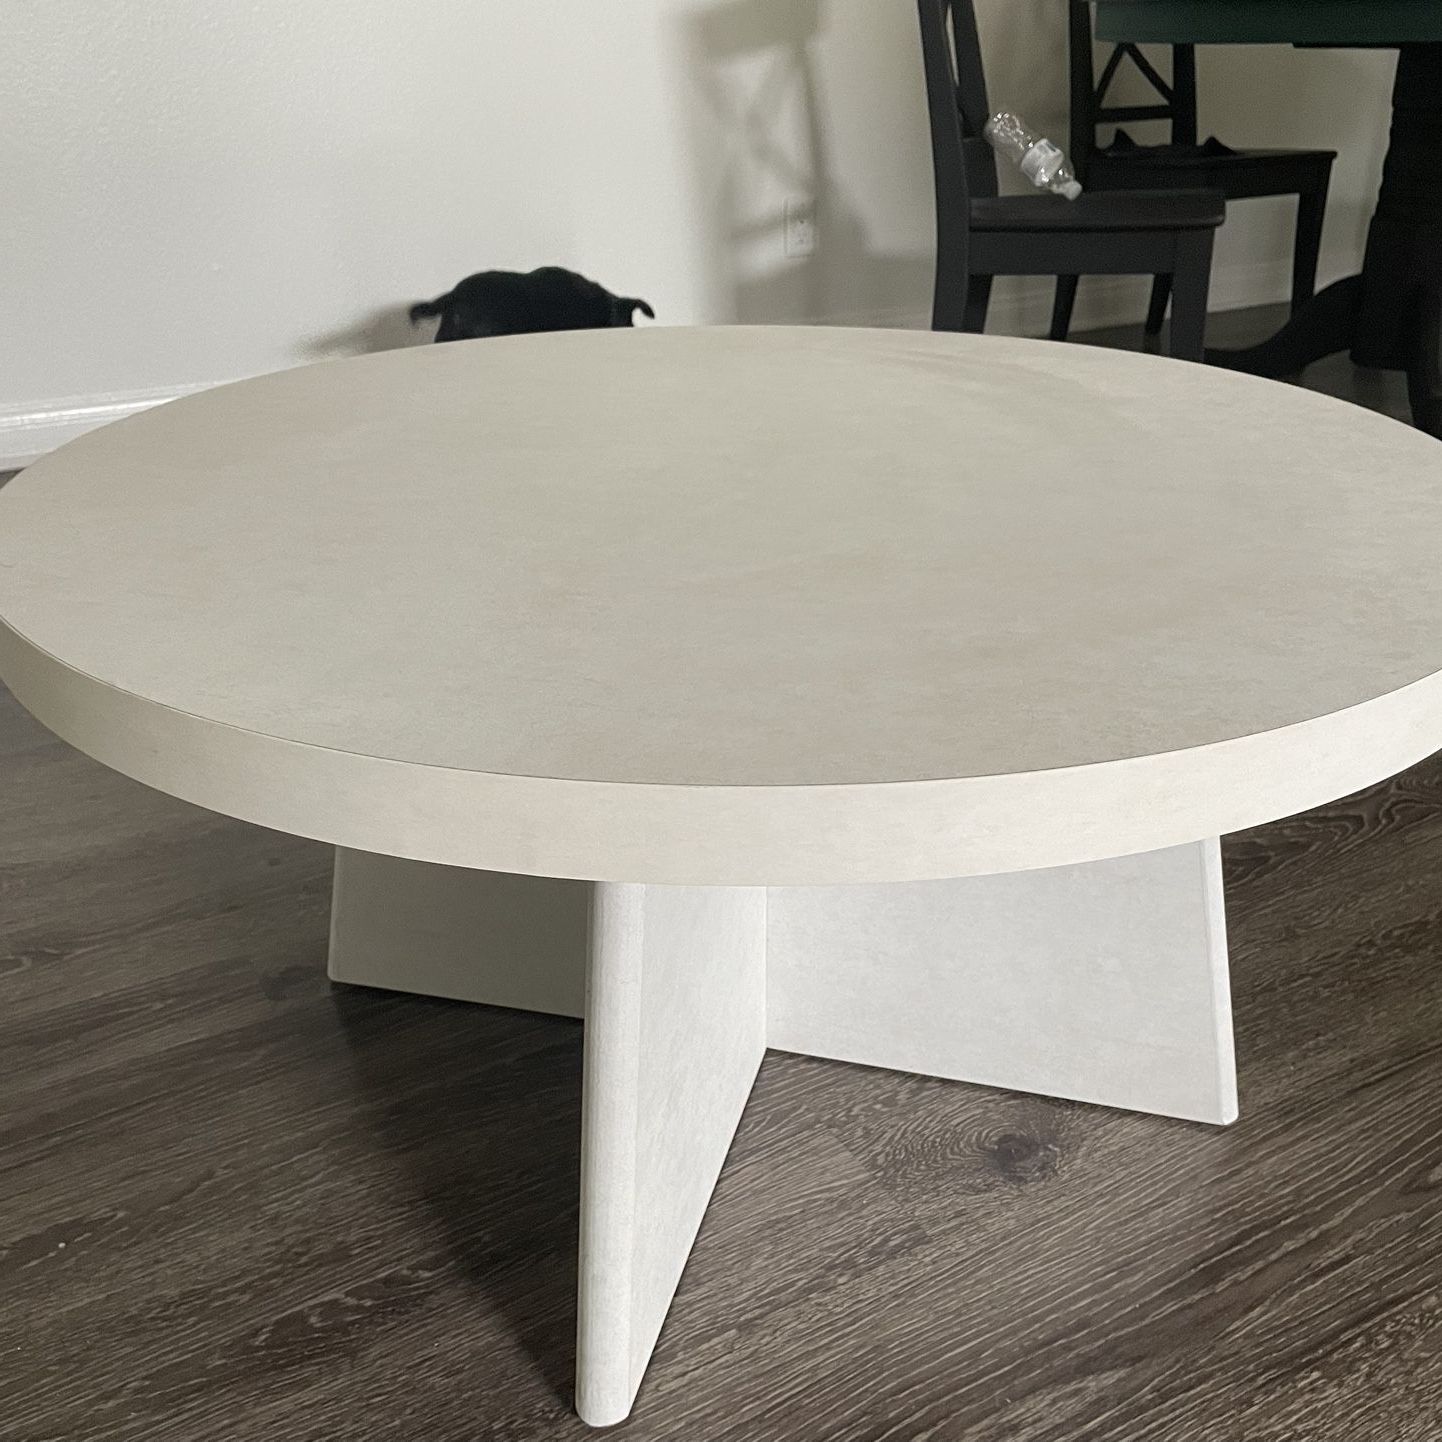 Latest Queer Eye Liam Round Coffee Table For Sale In Huntington Beach, Ca – Offerup Throughout Liam Round Plaster Coffee Tables (View 9 of 10)